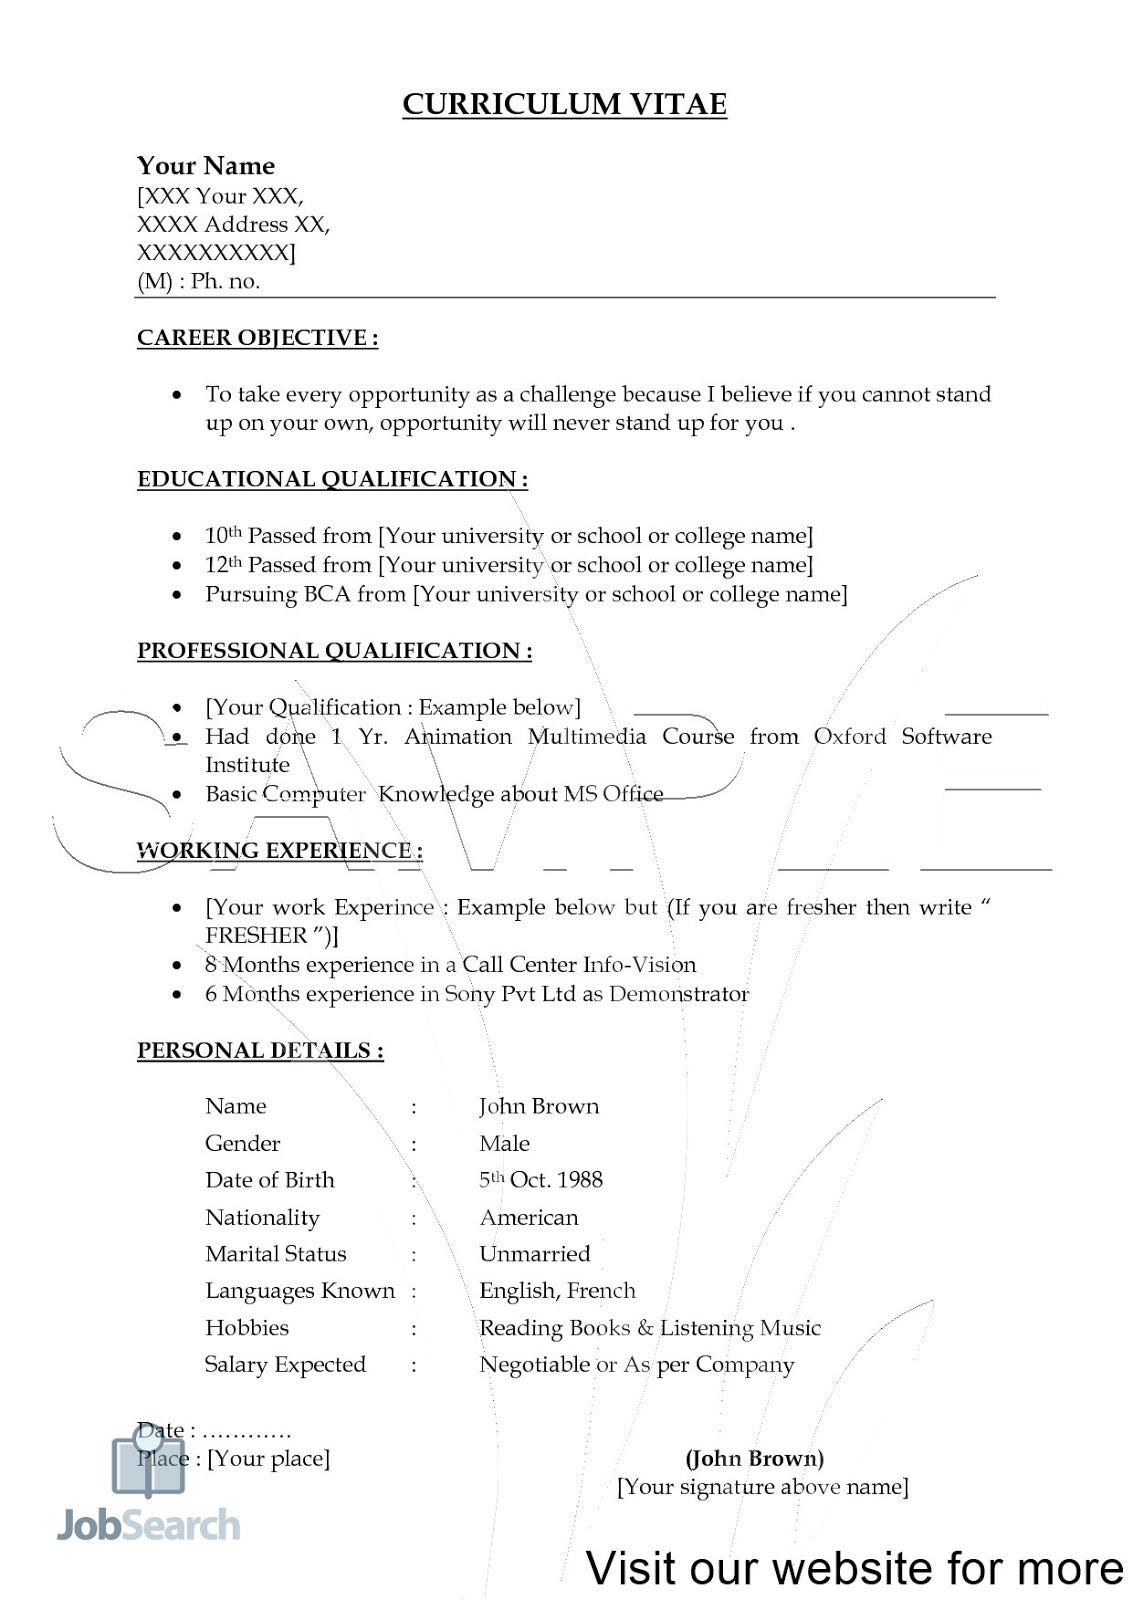 Resume Sample Format in Word for Student 2020 | by Marie ...